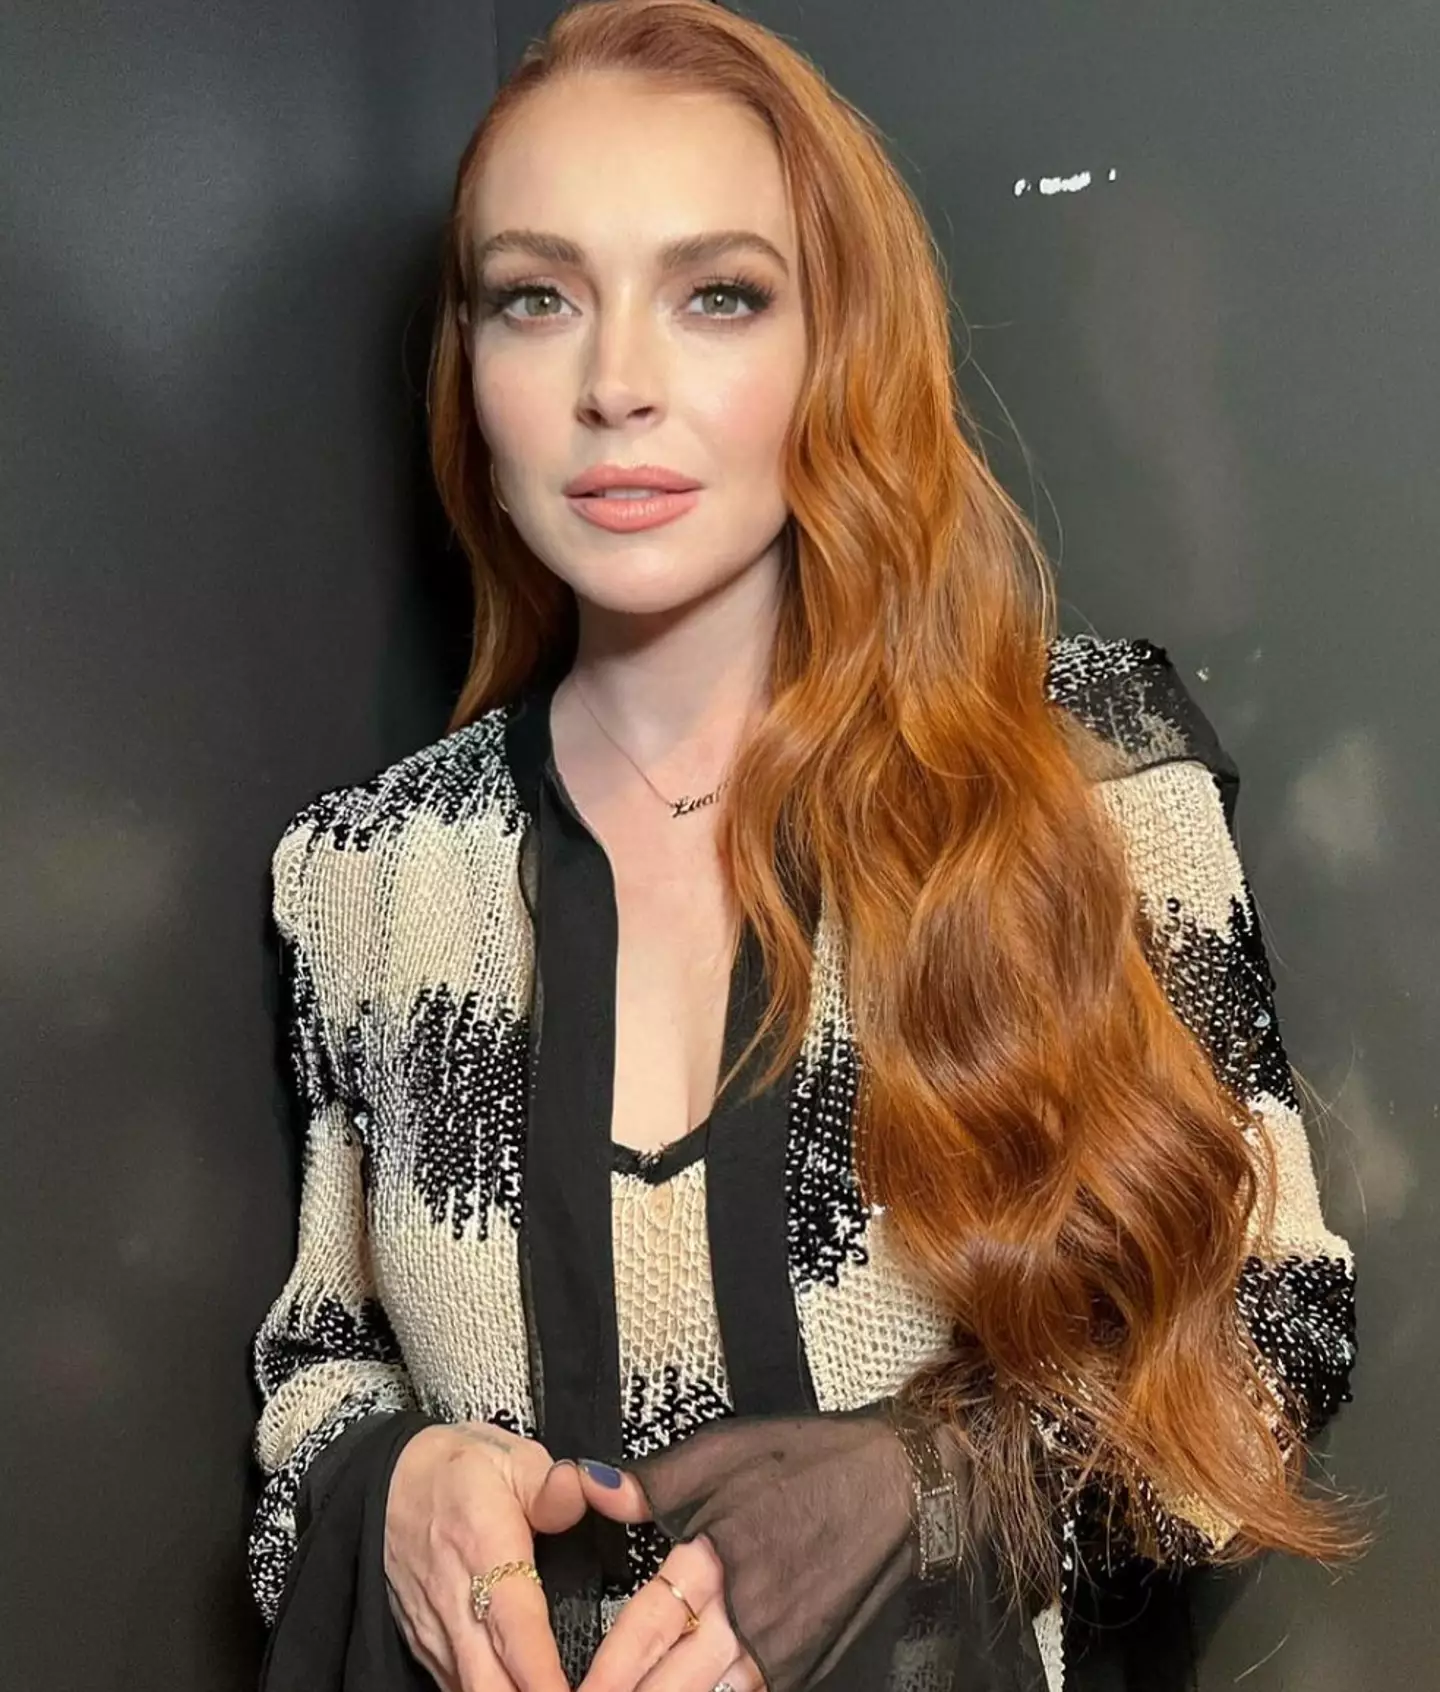 Lohan makes a brief cameo in the film.